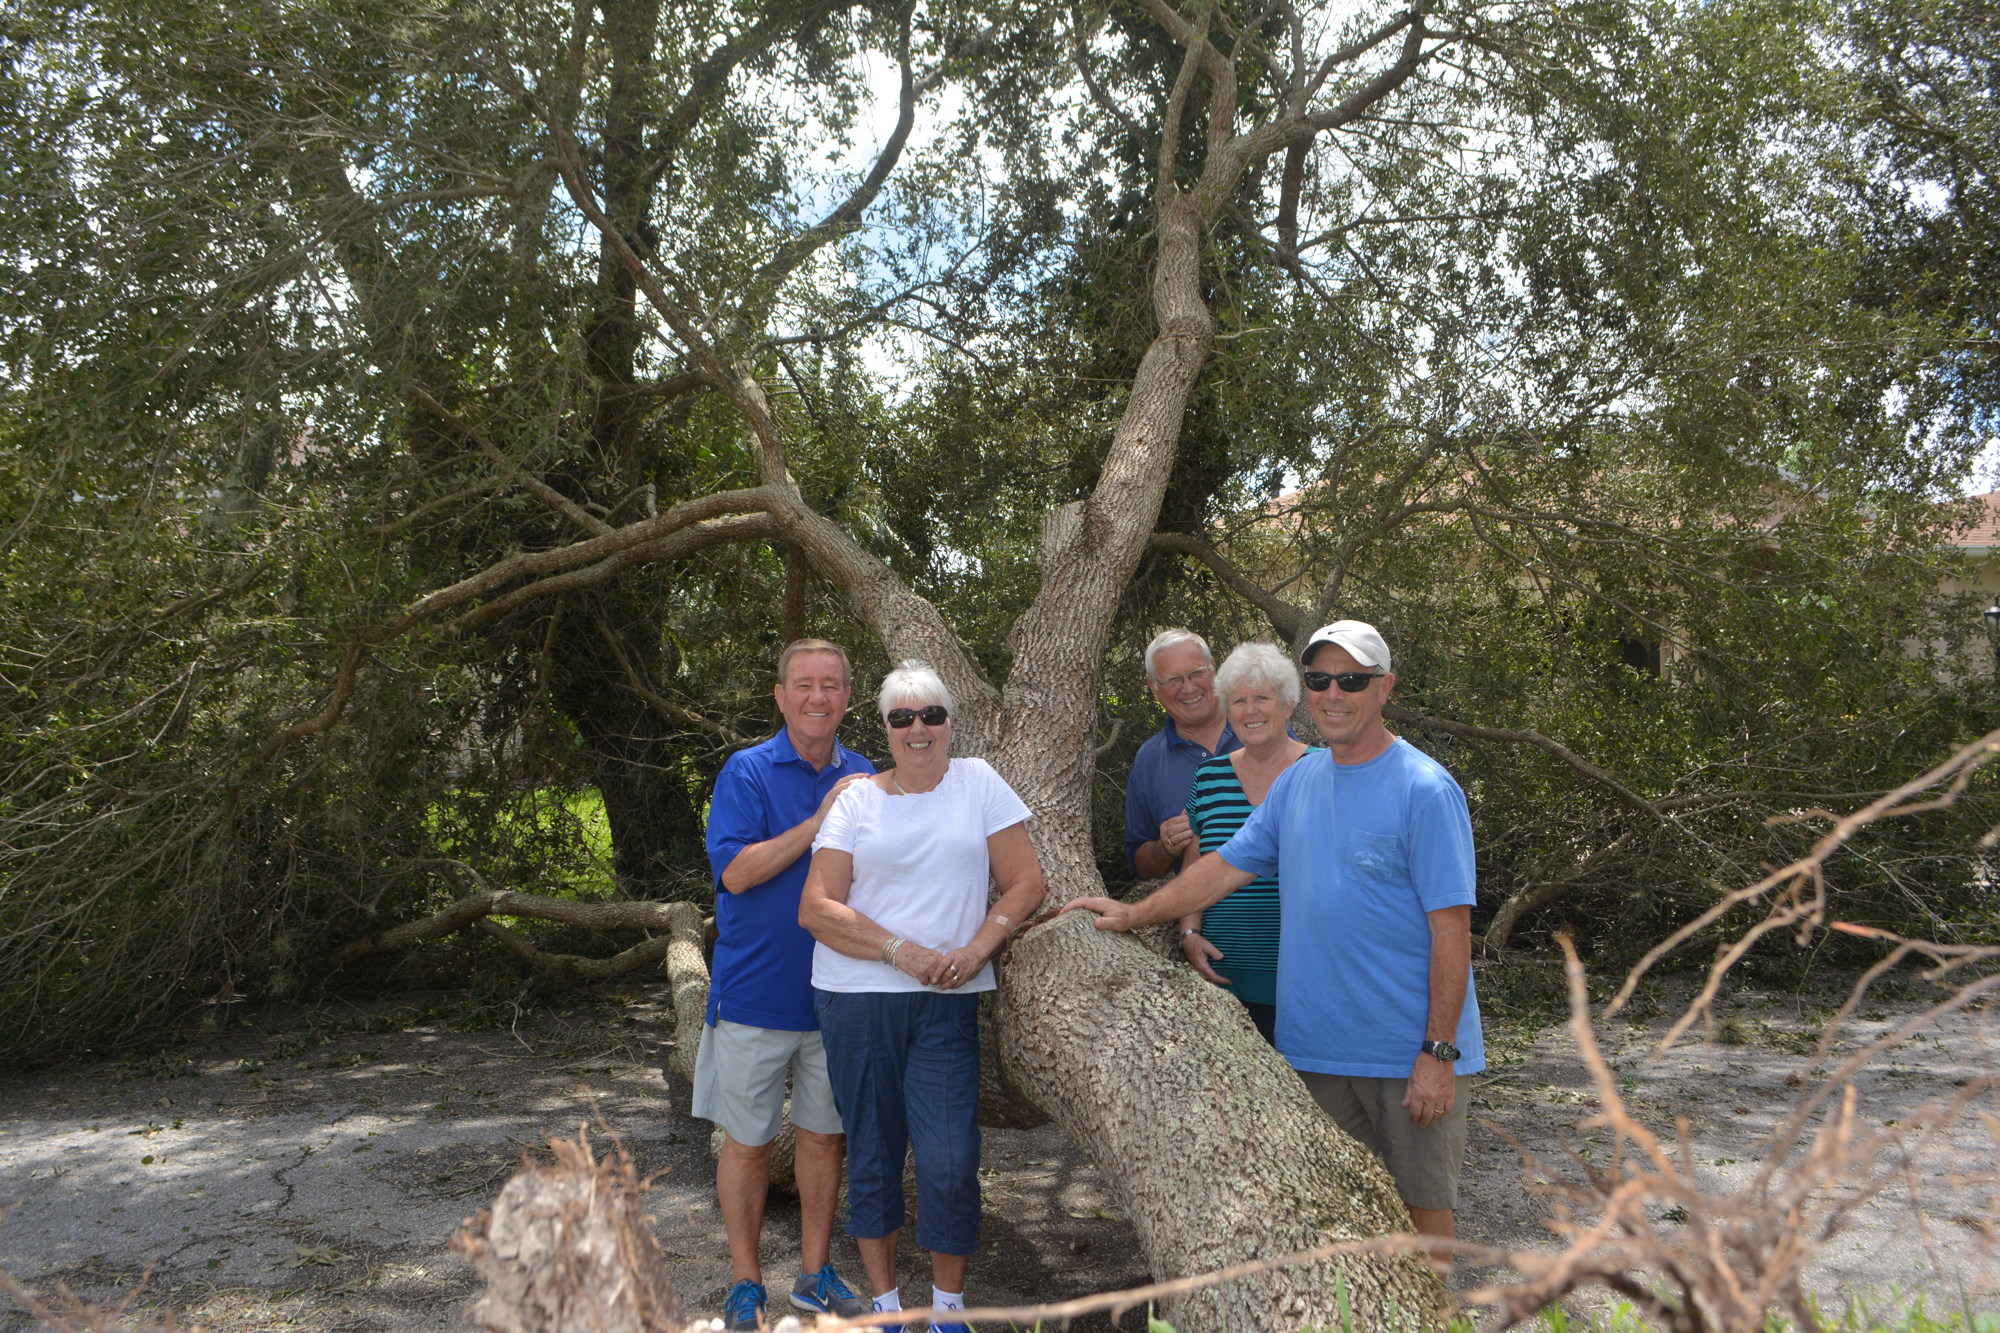 Thomas and Glenis Thomas, Alex and Corrie Moor and Bruce Sengstaken were safe after Hurricane Irma despite a tree falling on their street, Beeflower Drive in Summerfield.